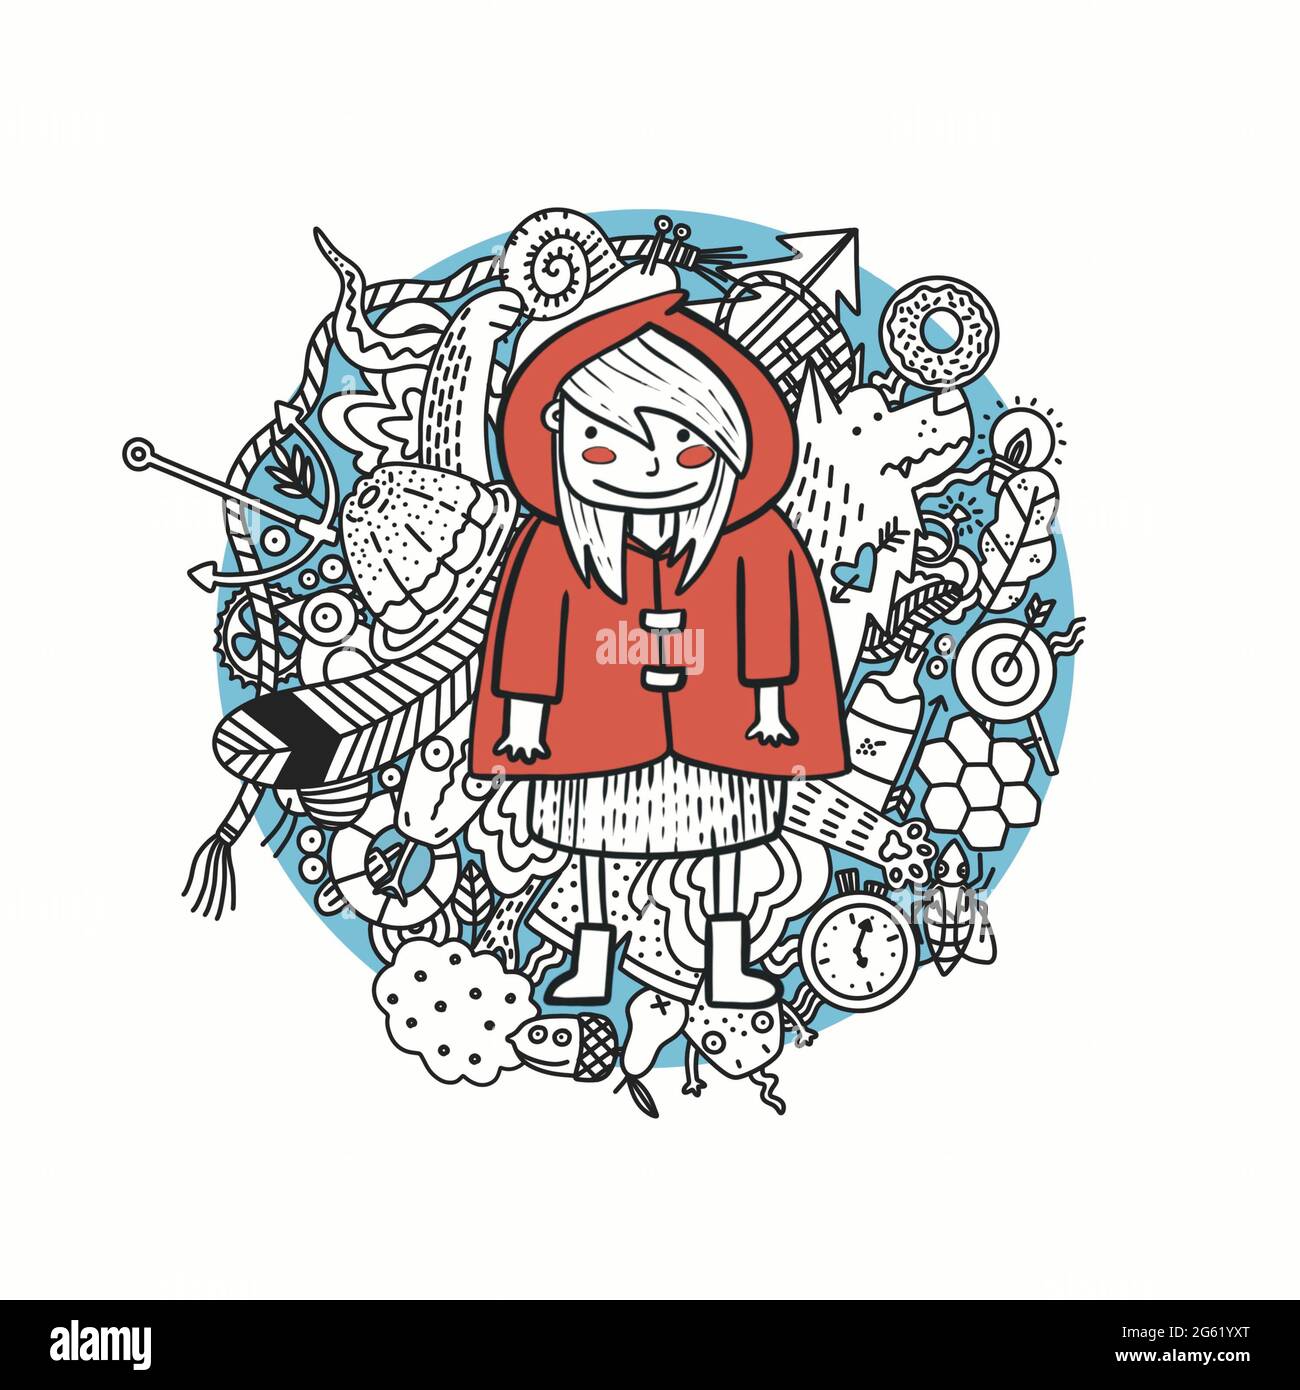 The little girl in a red coat. Red riding hood and a lot of small things on the background. Stock Photo